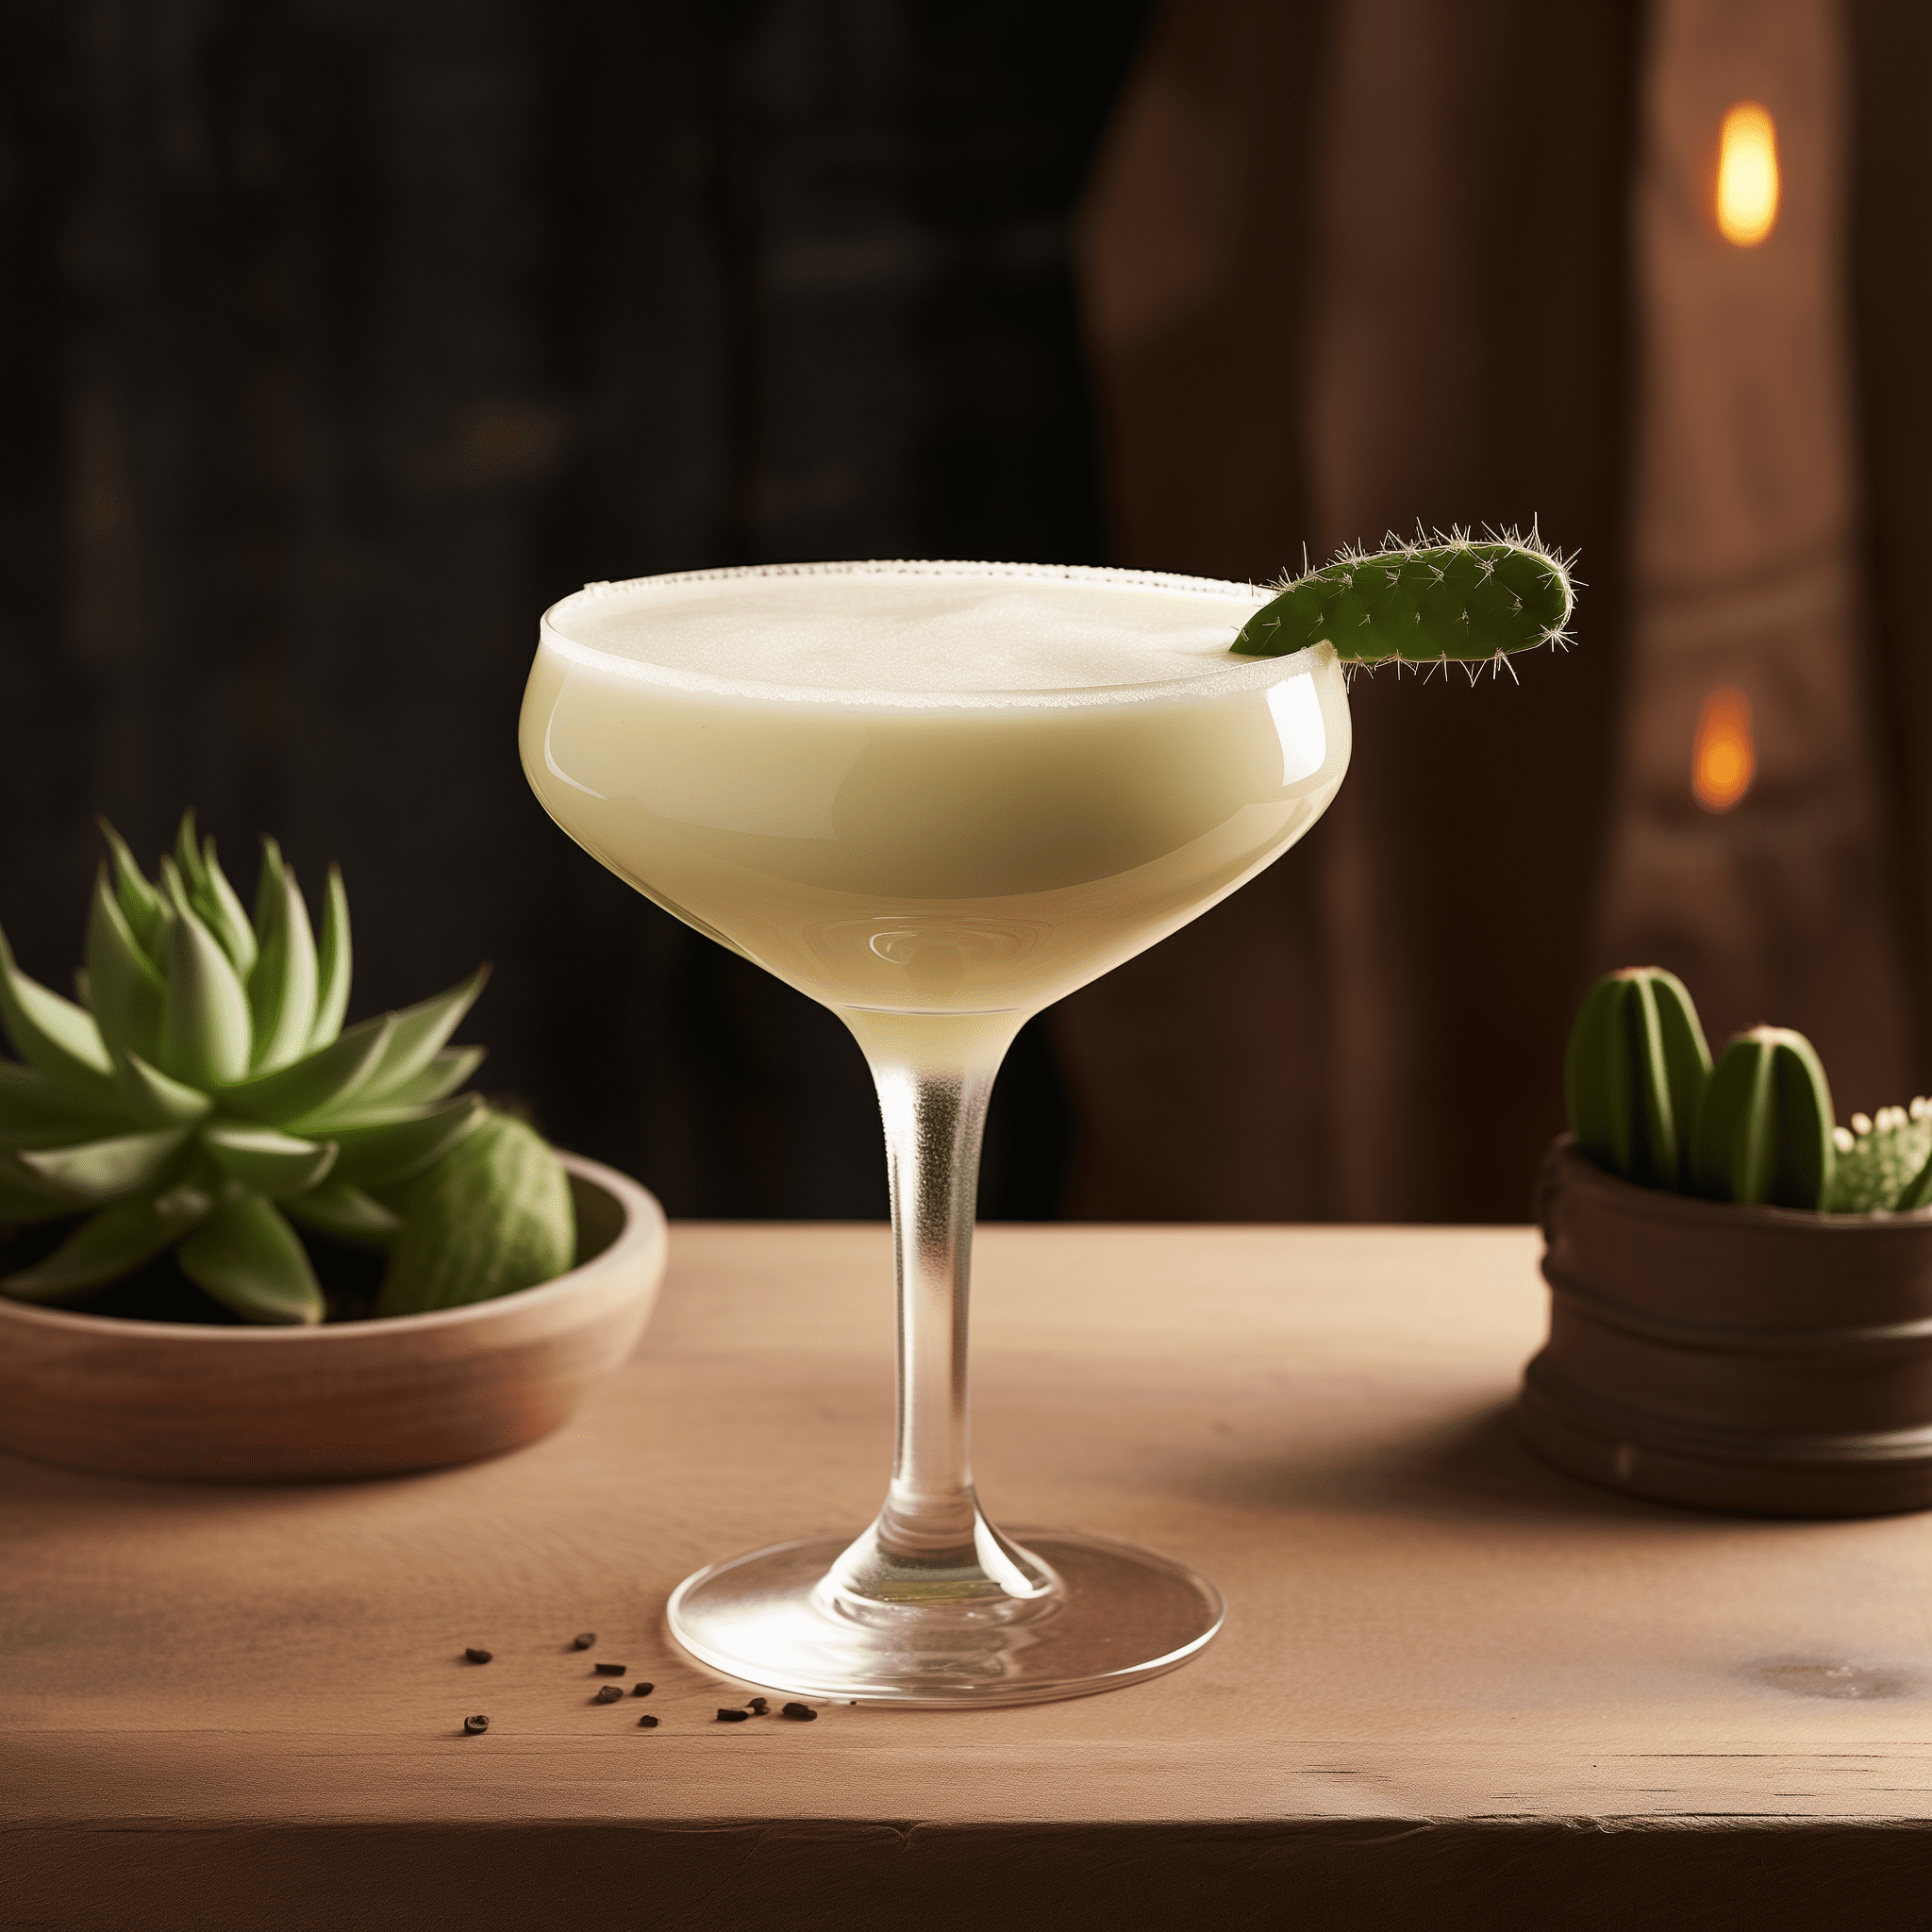 Irish Cactus Cocktail Recipe - The Irish Cactus offers a rich, creamy sweetness with a bold undercurrent of agave from the tequila. It's a harmonious blend of smooth and fiery, with a velvety texture that coats the palate.